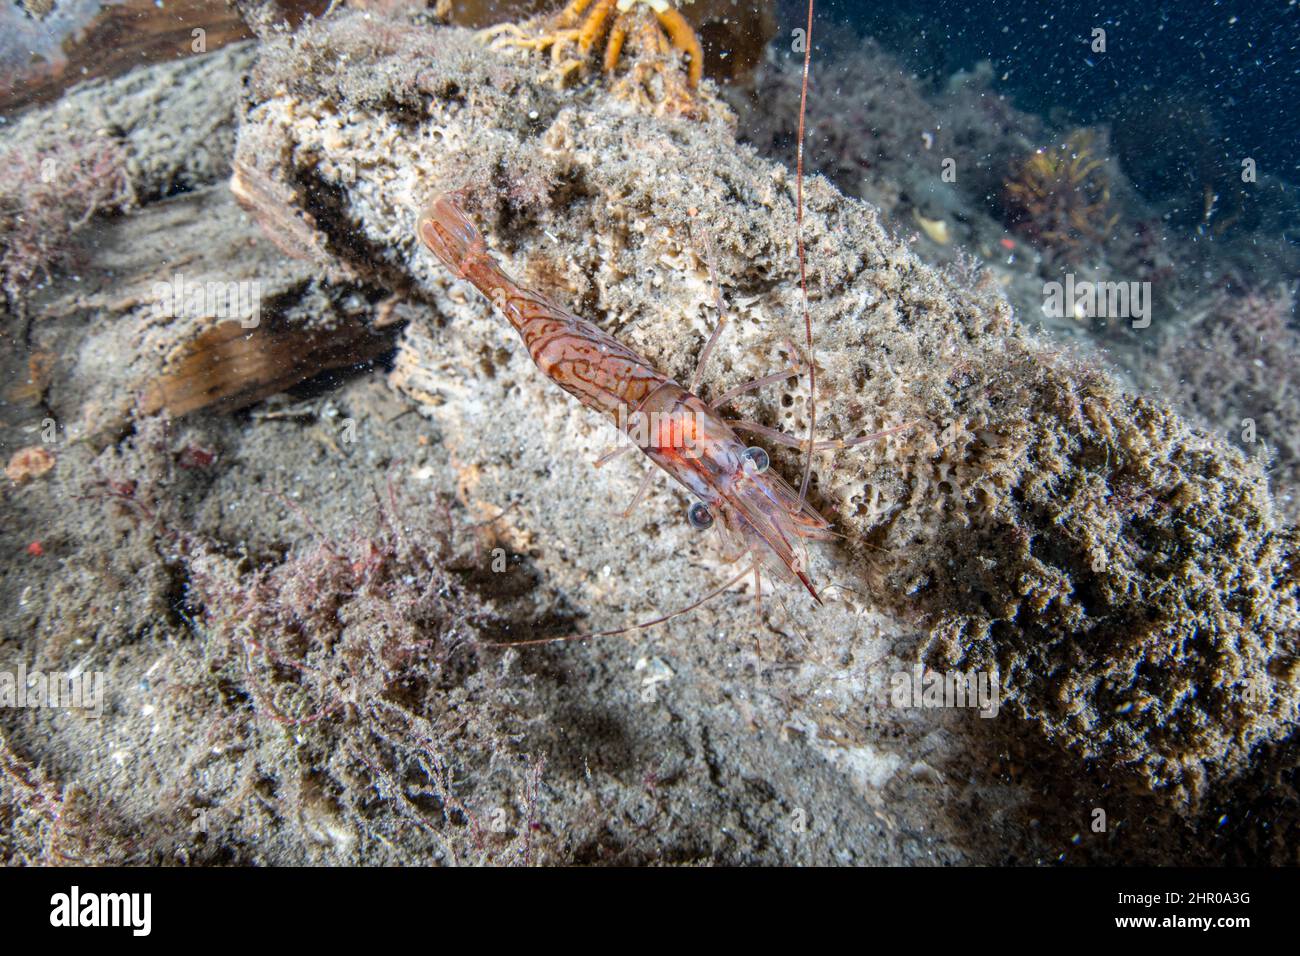 Cold-water shrimp (Pandalus montagui) Flatanger, coastal commune in central Norway, north of the Trondheimfjord, North Atlantic Ocean Norway Stock Photo